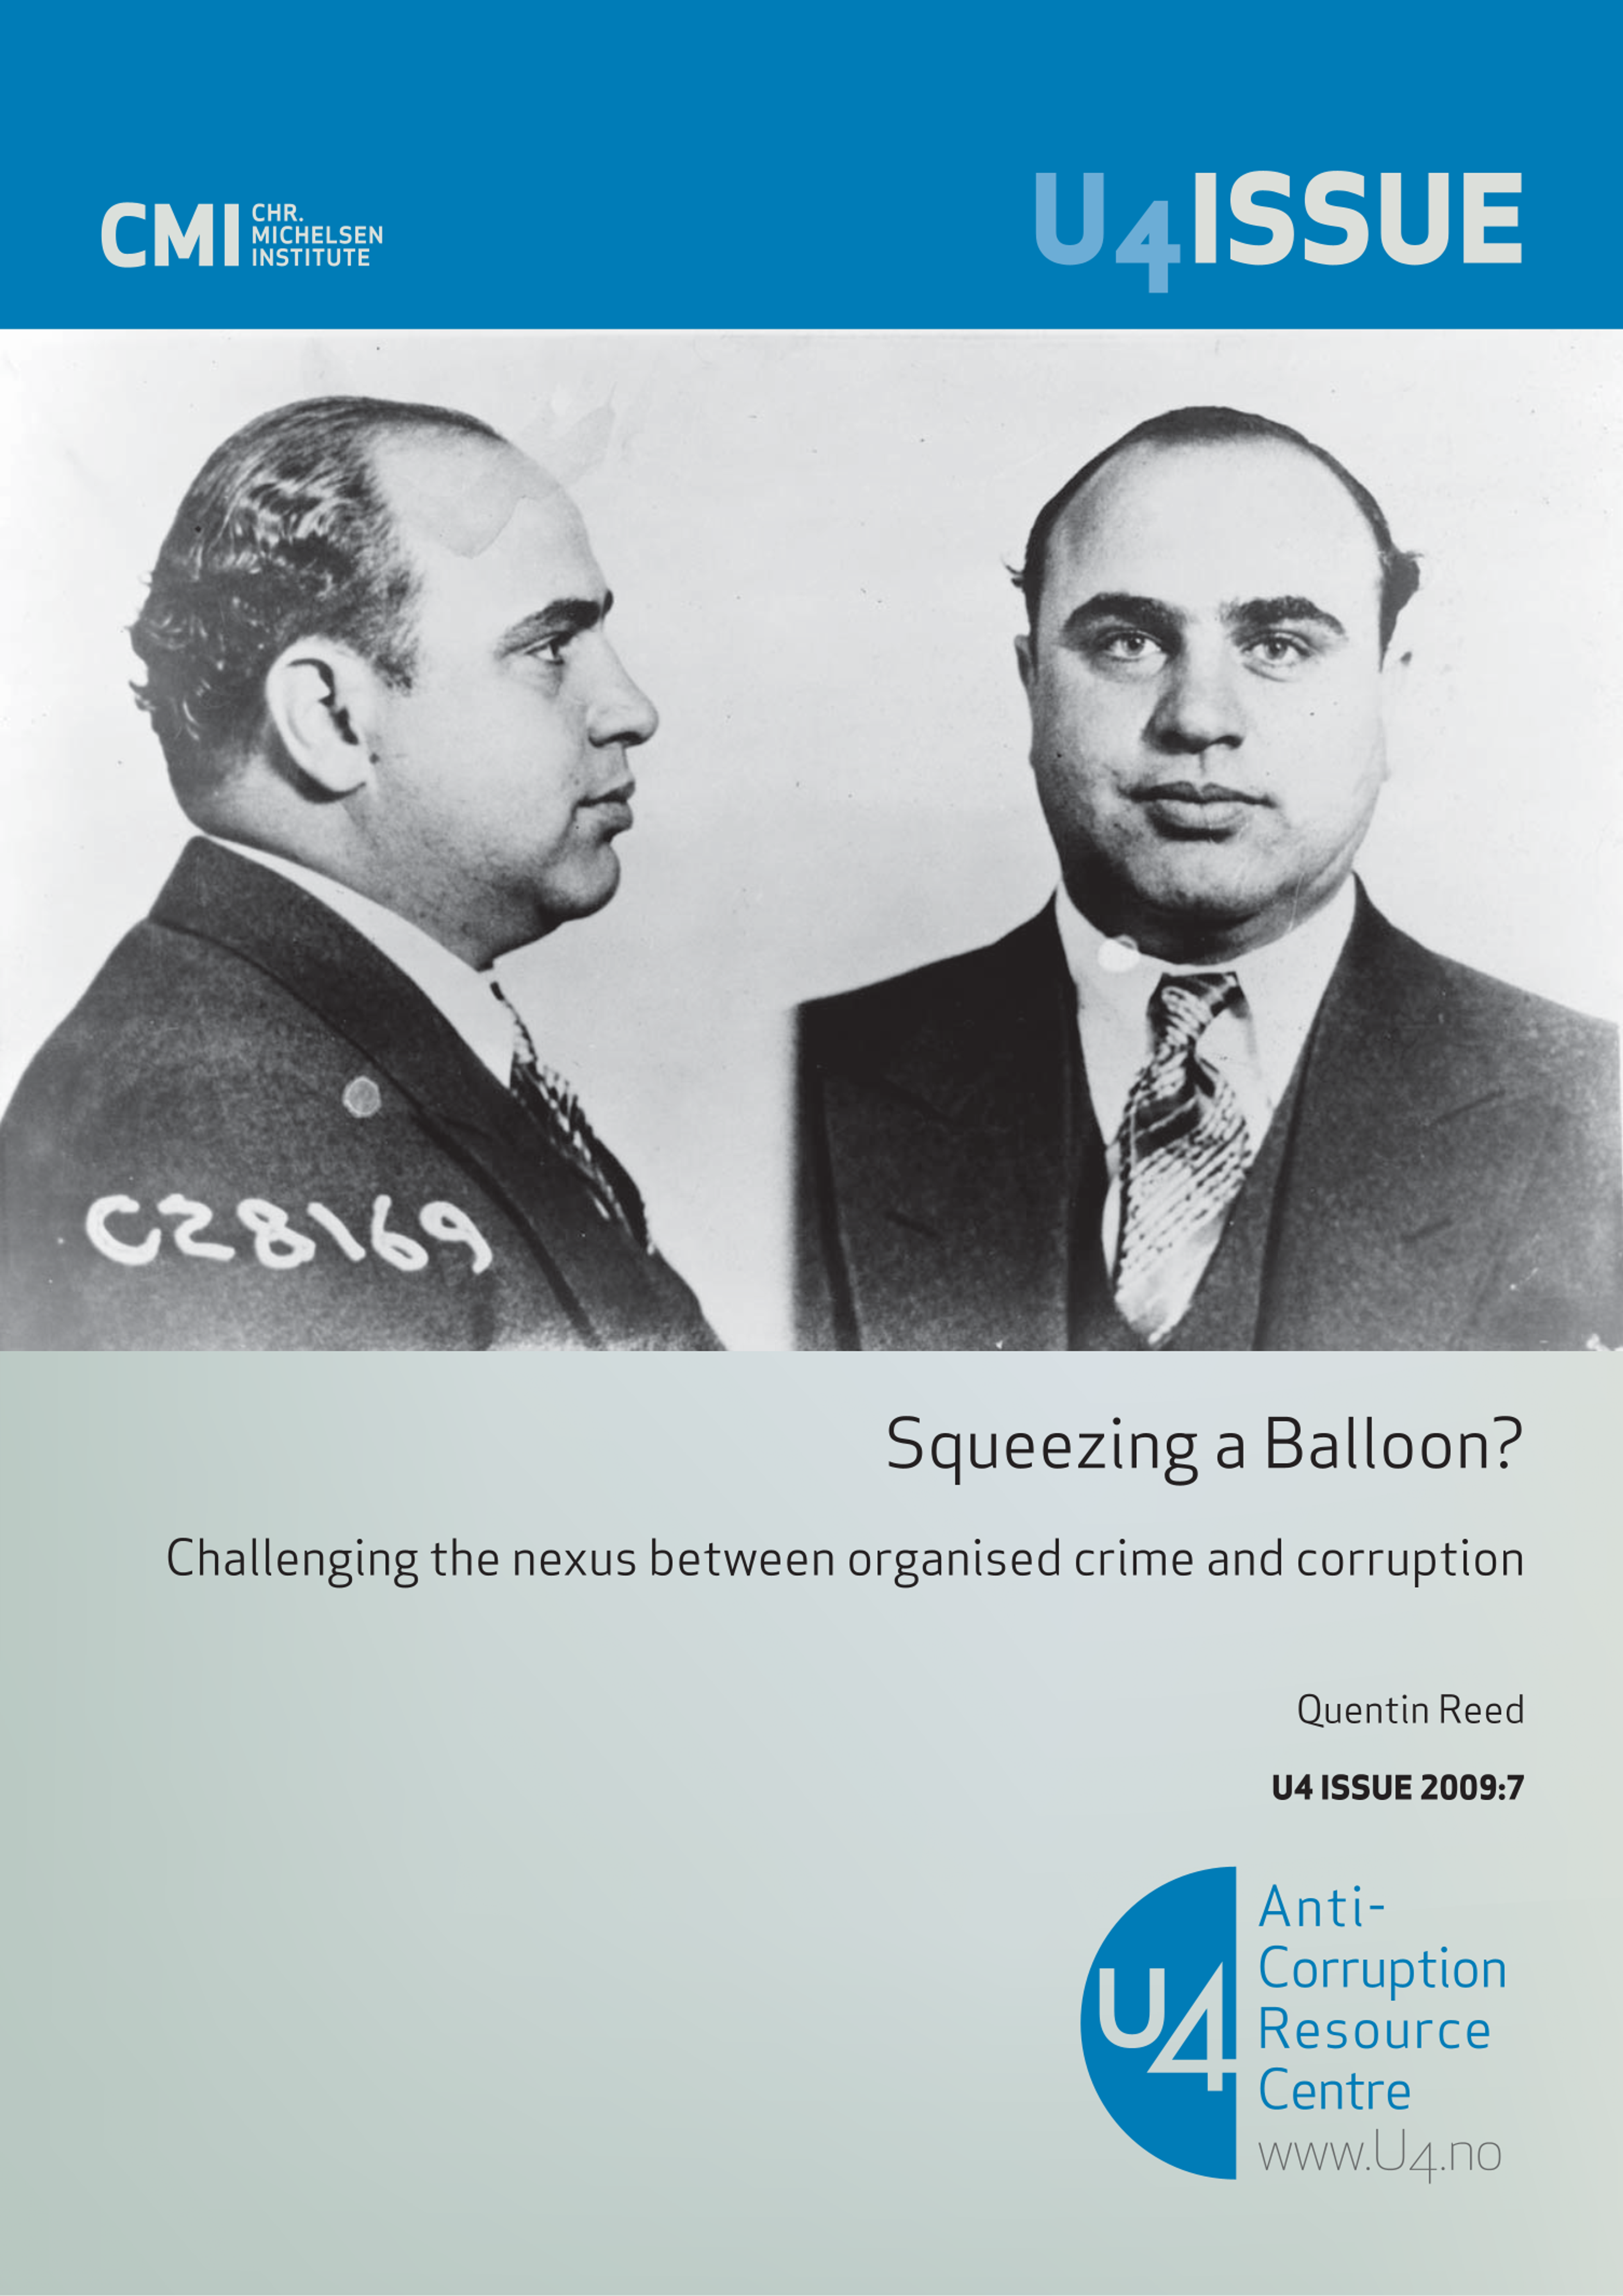 Squeezing a balloon? Challenging the nexus between organised crime and corruption